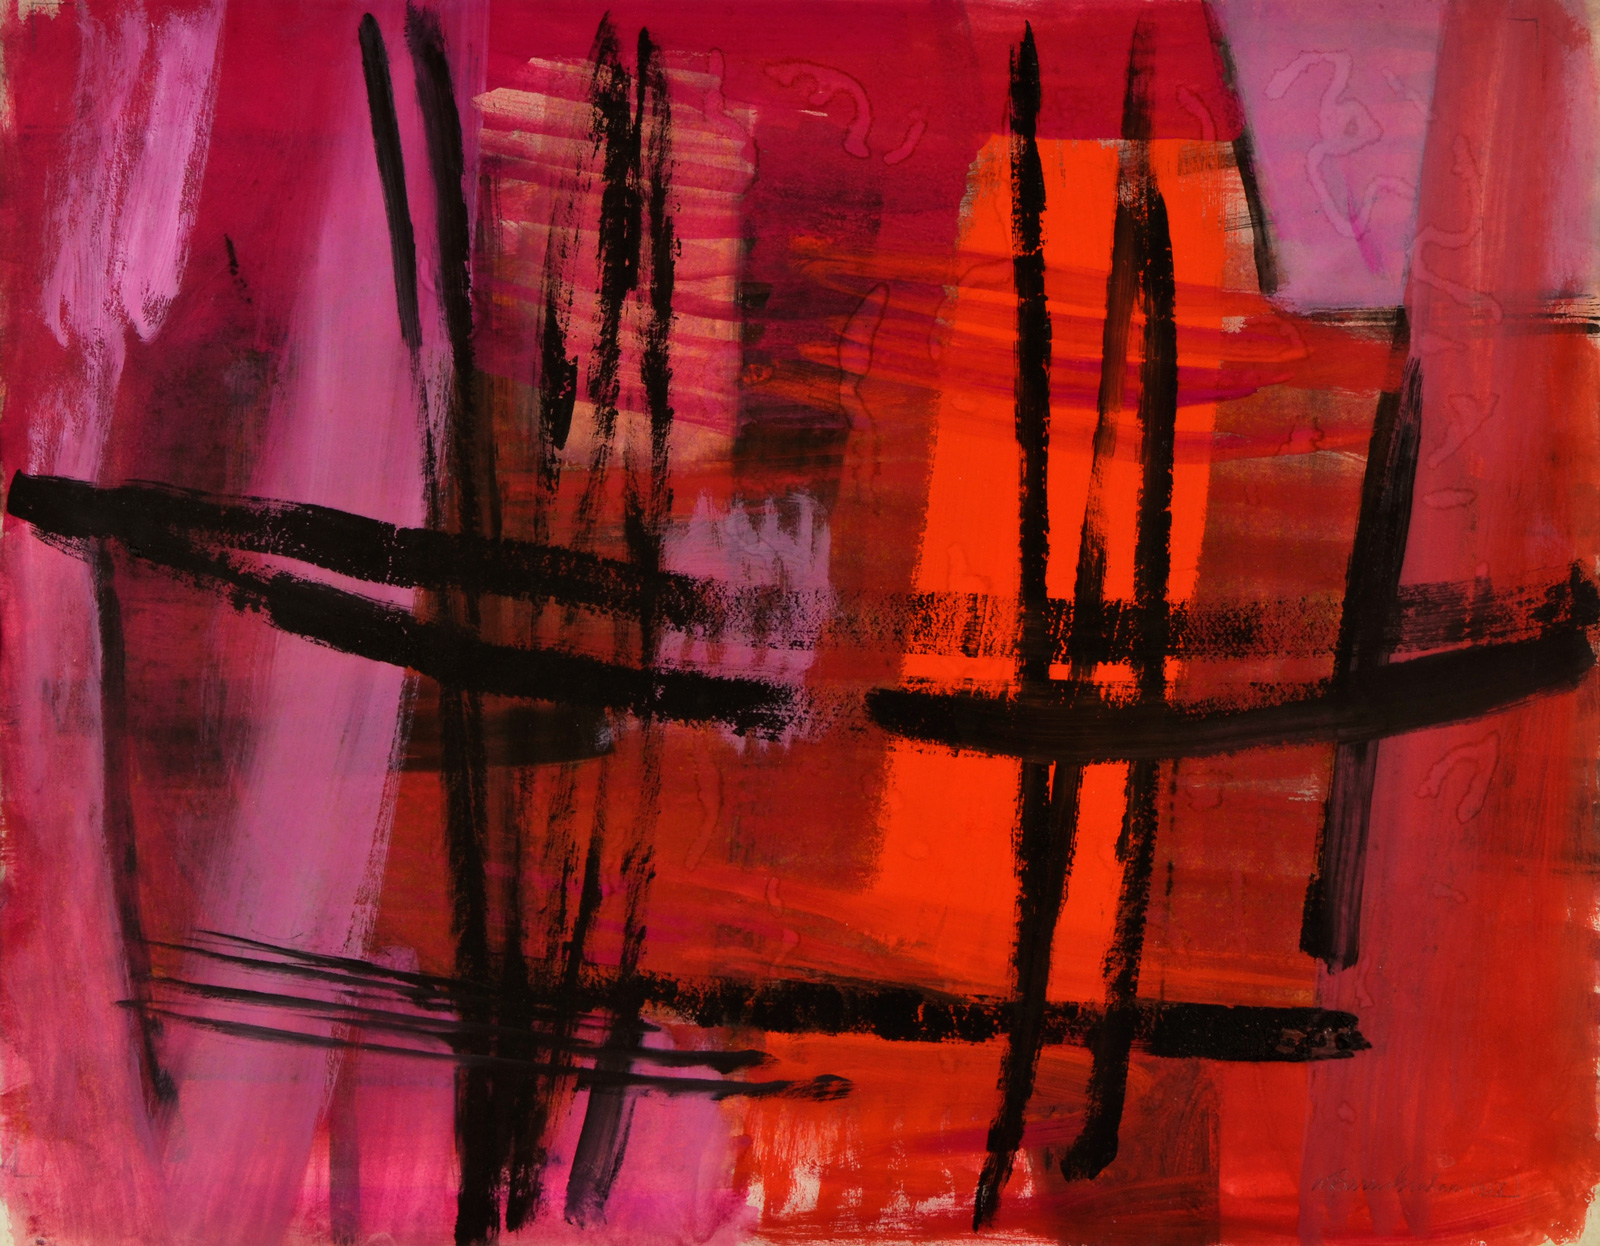 A gouache painting with red and pink background and a loose grid of black brushstrokes